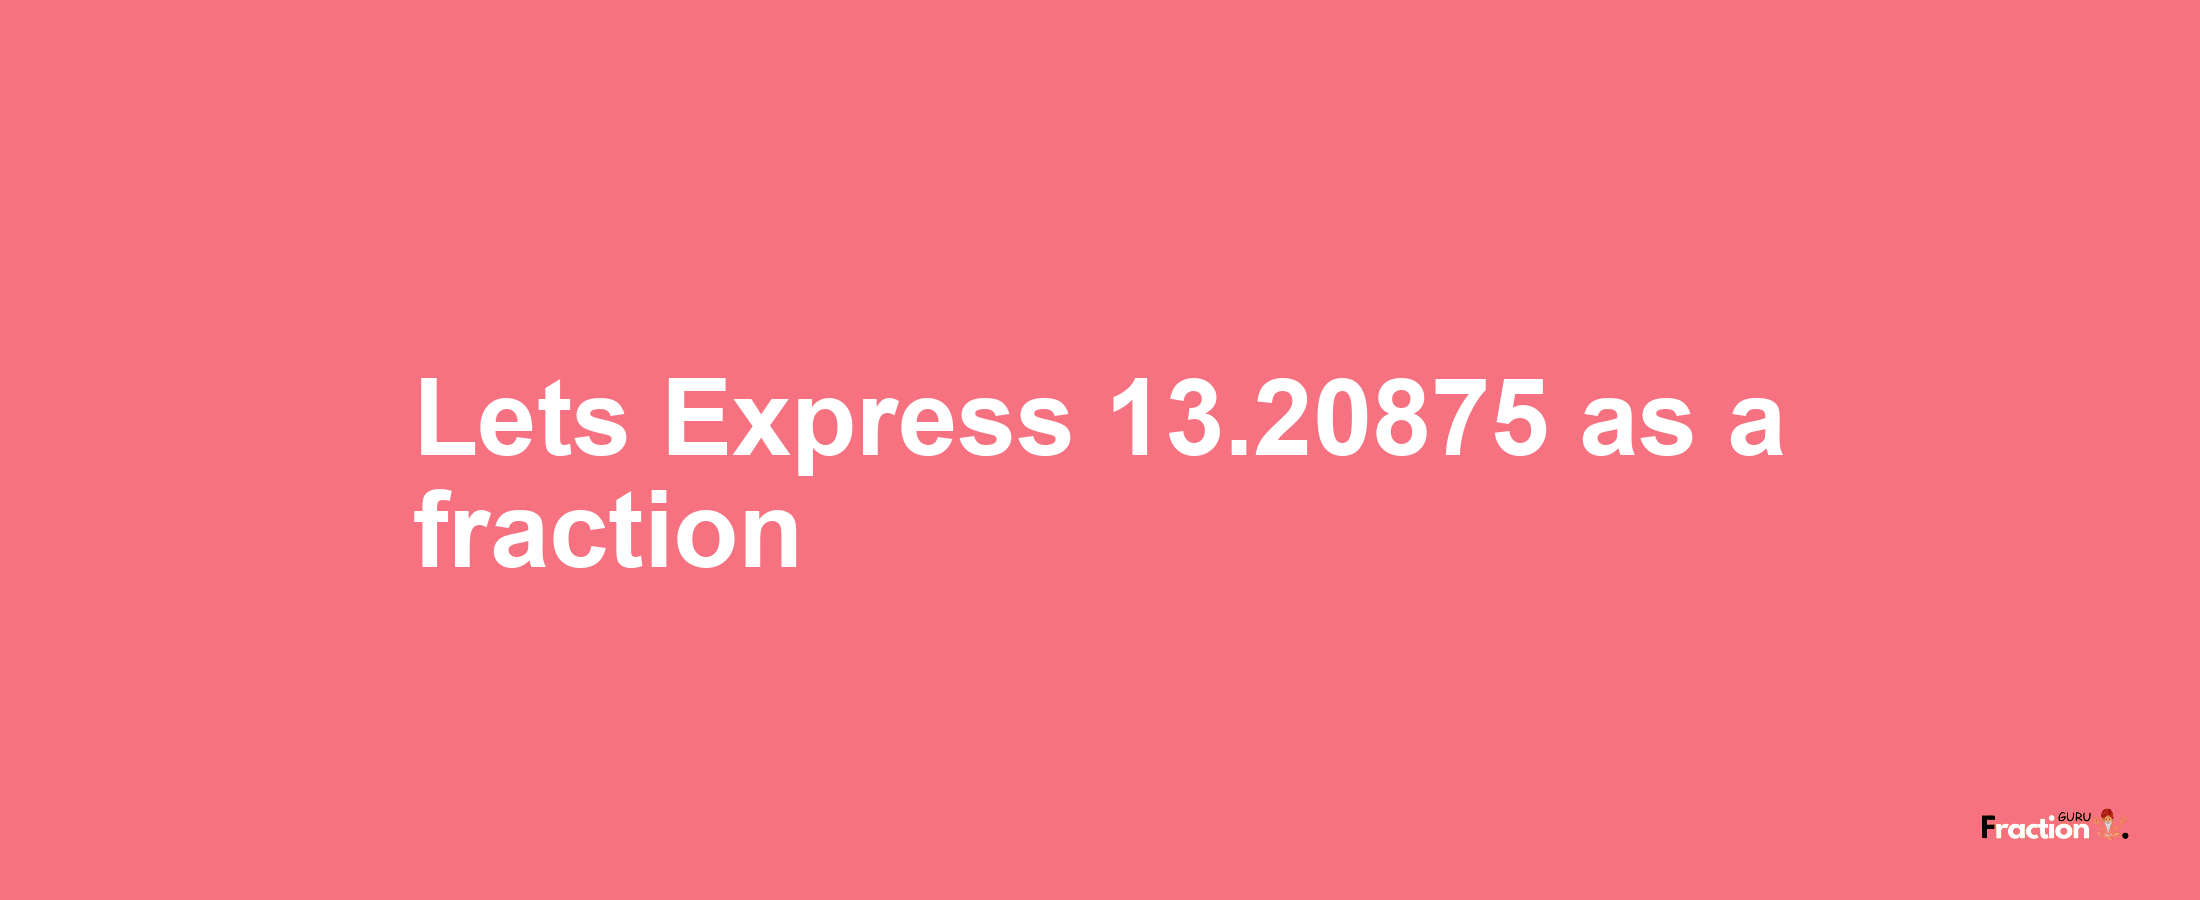 Lets Express 13.20875 as afraction